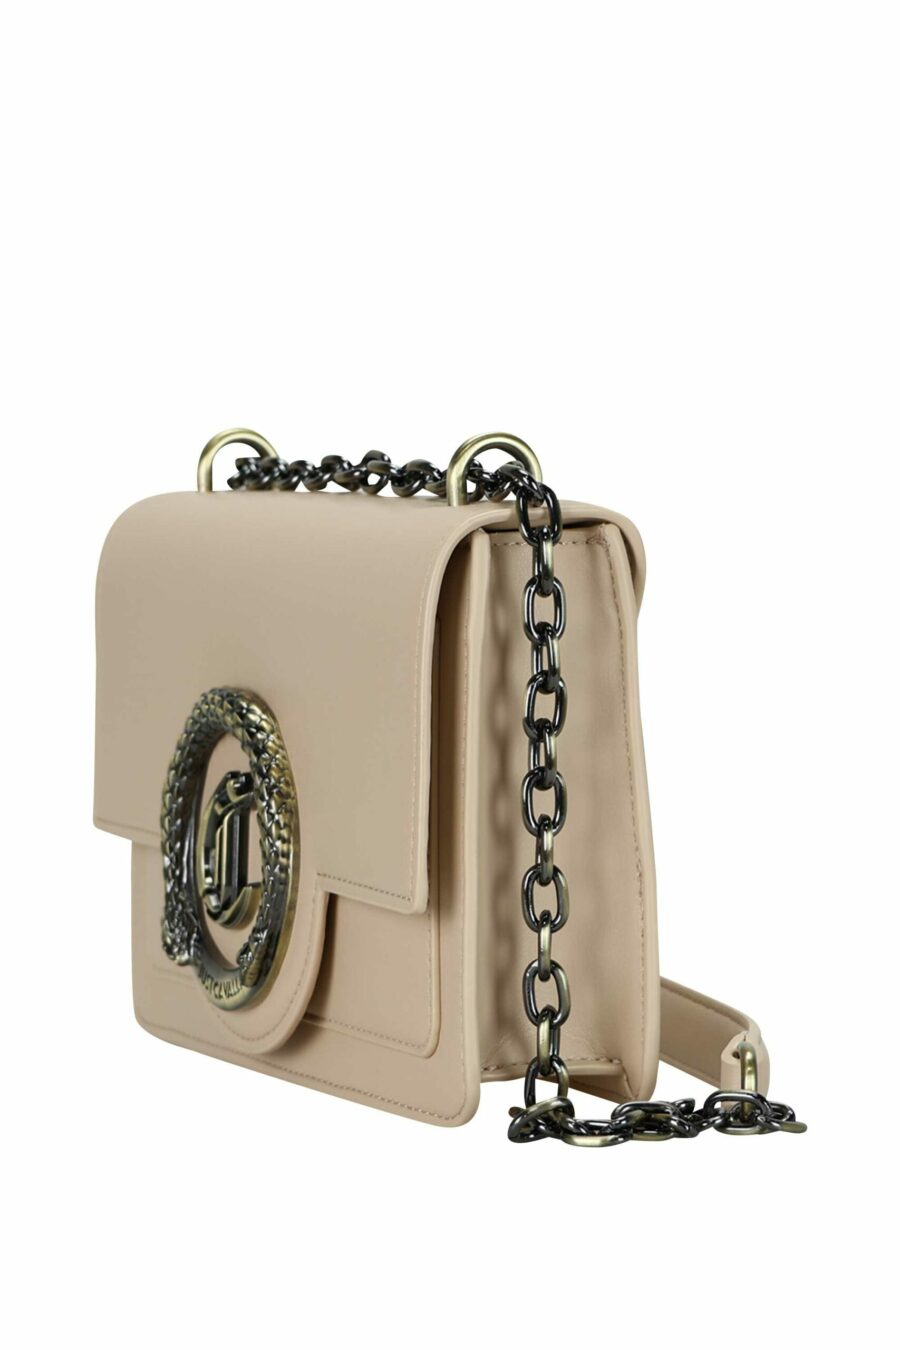 Square beige shoulder bag with chain and golden circular "c" logo - 8052672735591 1 scaled